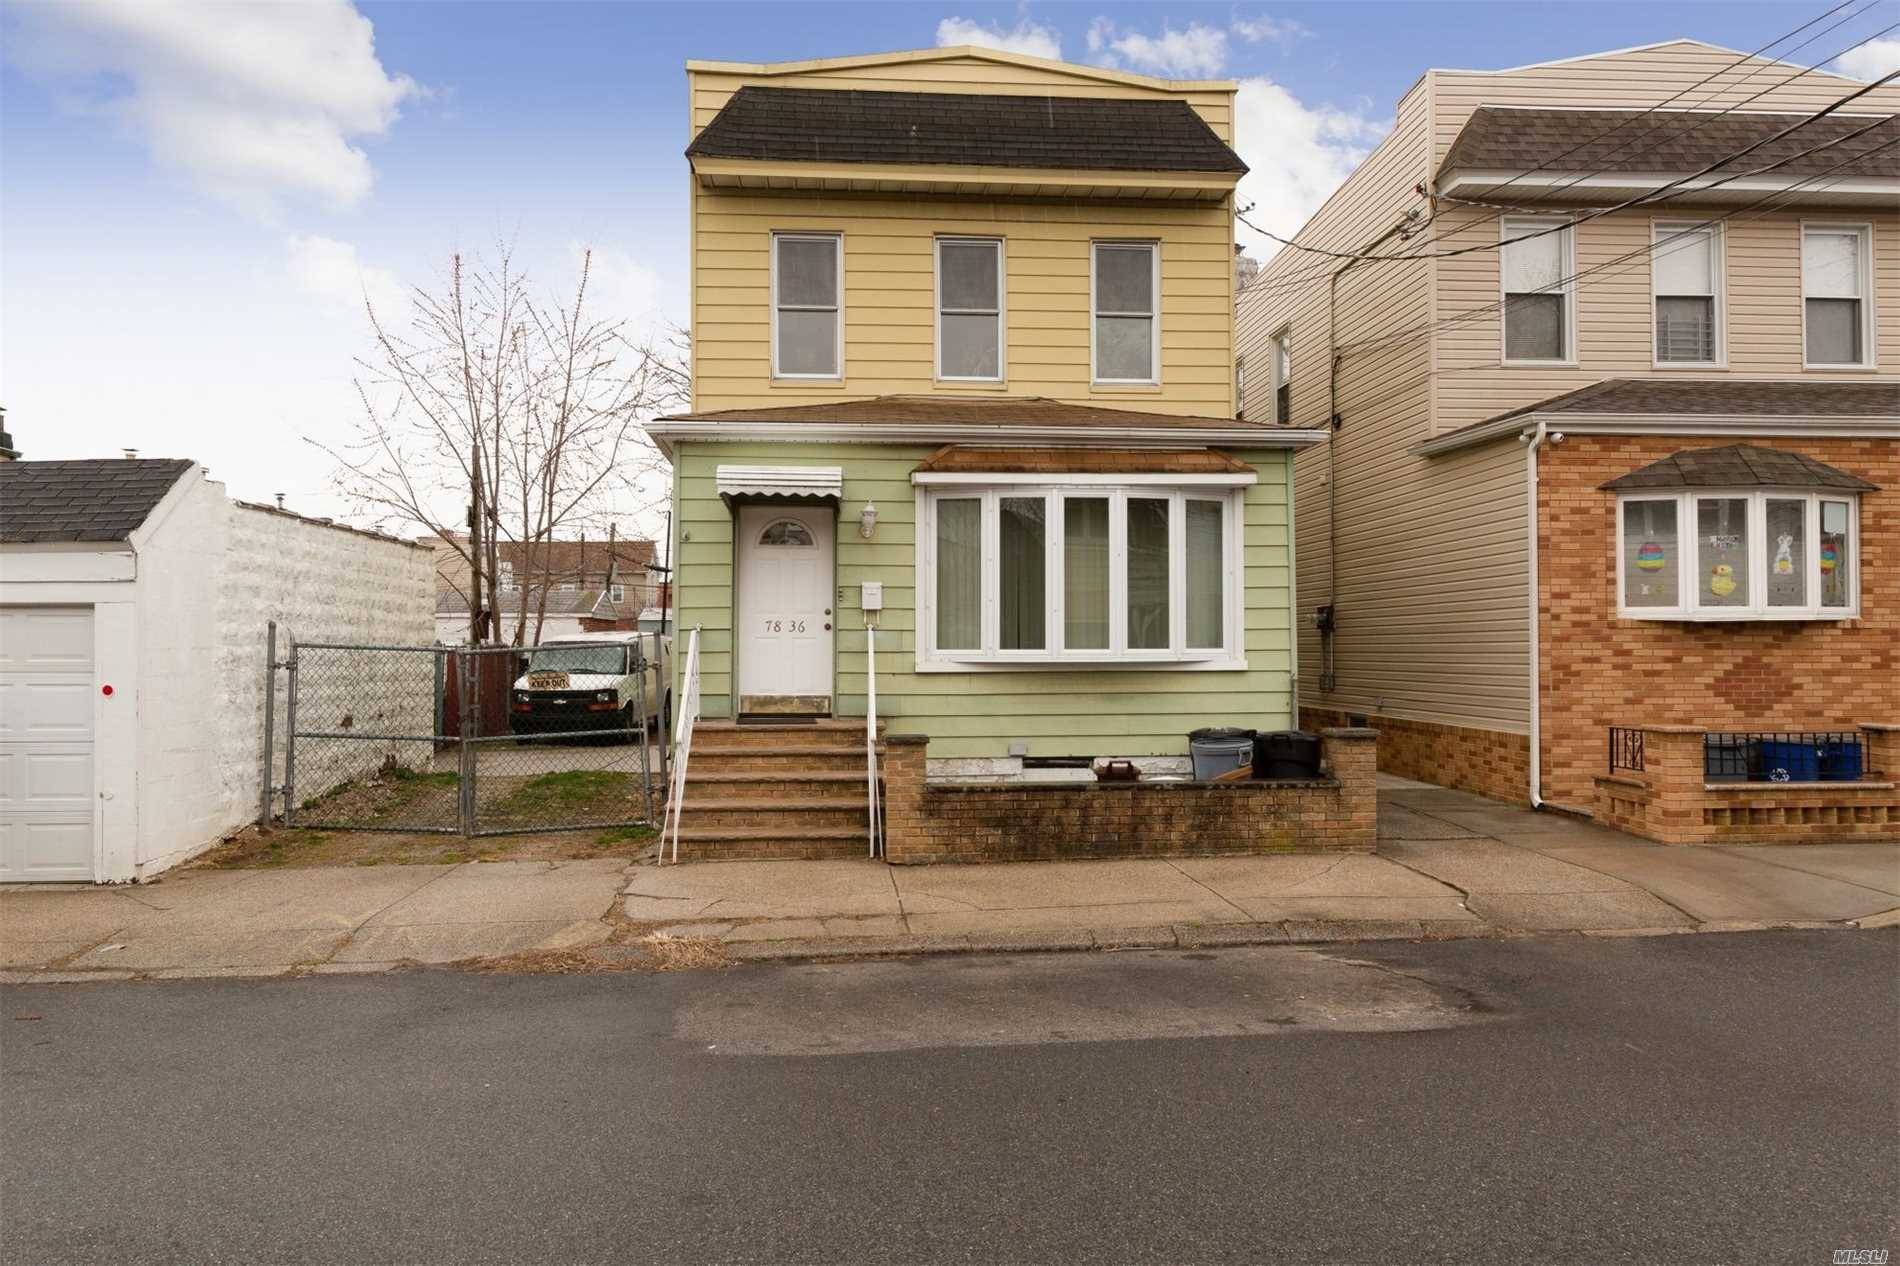 Rare Detached 2 Family Home in Middle Village near public transportation and shopping.